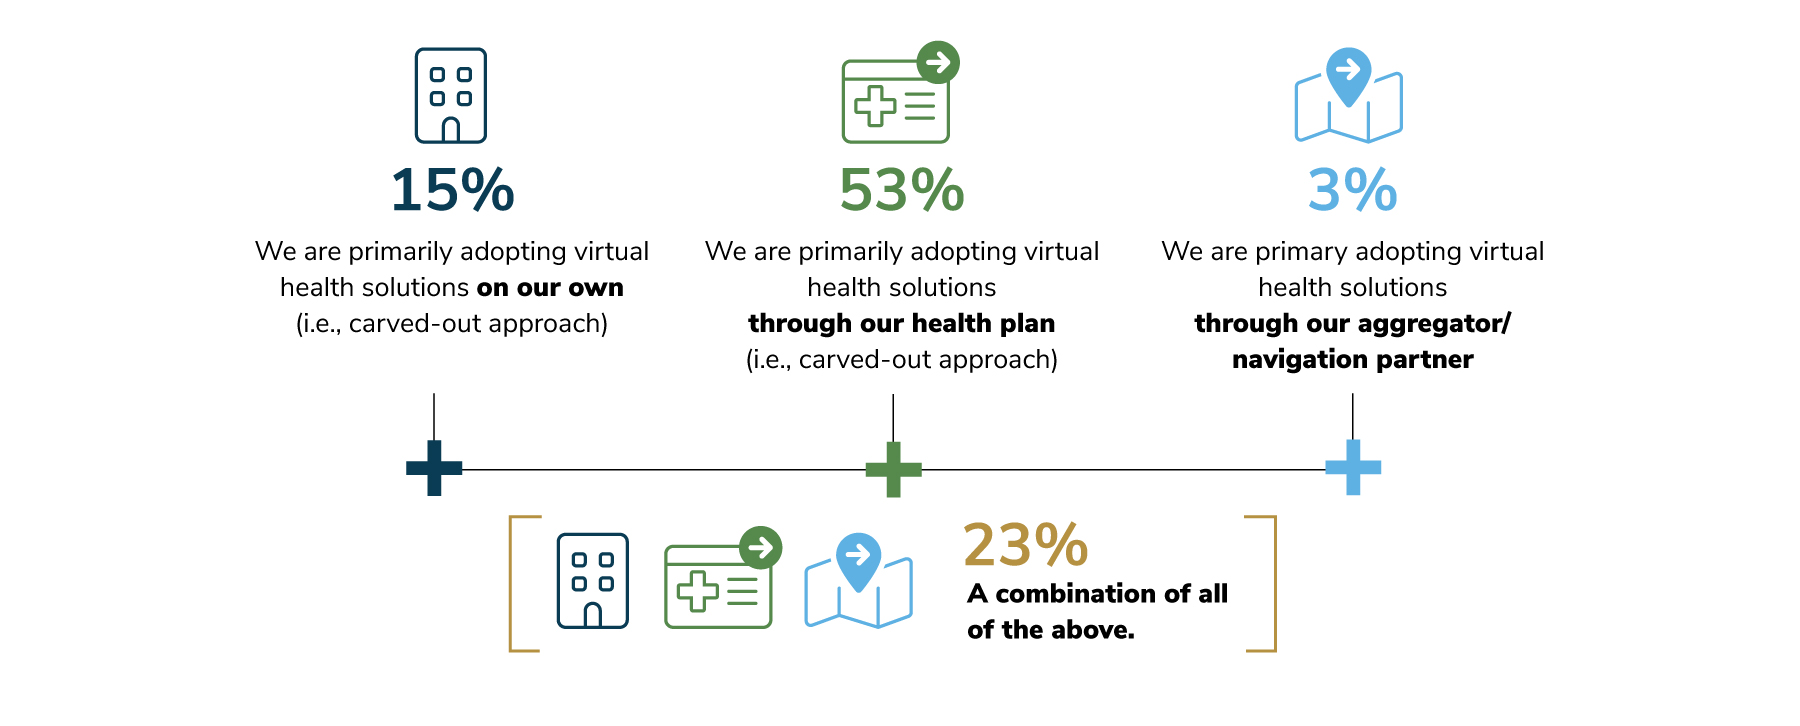 15% of employers primarily adopt virtual health solutions on their own; 53% adopt solutions through their health plan; 3% adopt through an aggregator; and 23% use a combination of all three approaches.